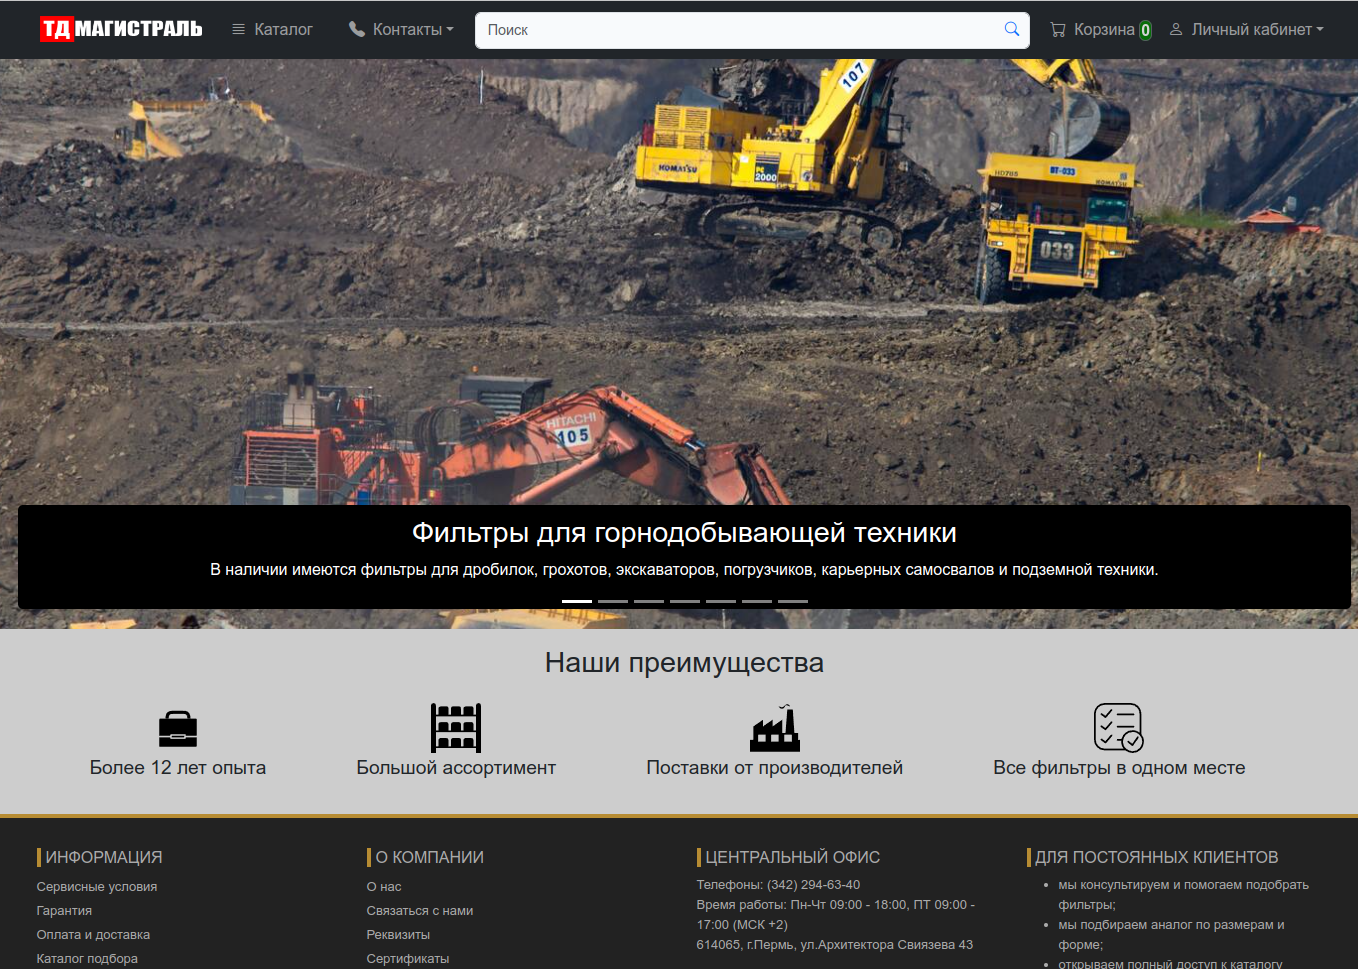 The main website of the company